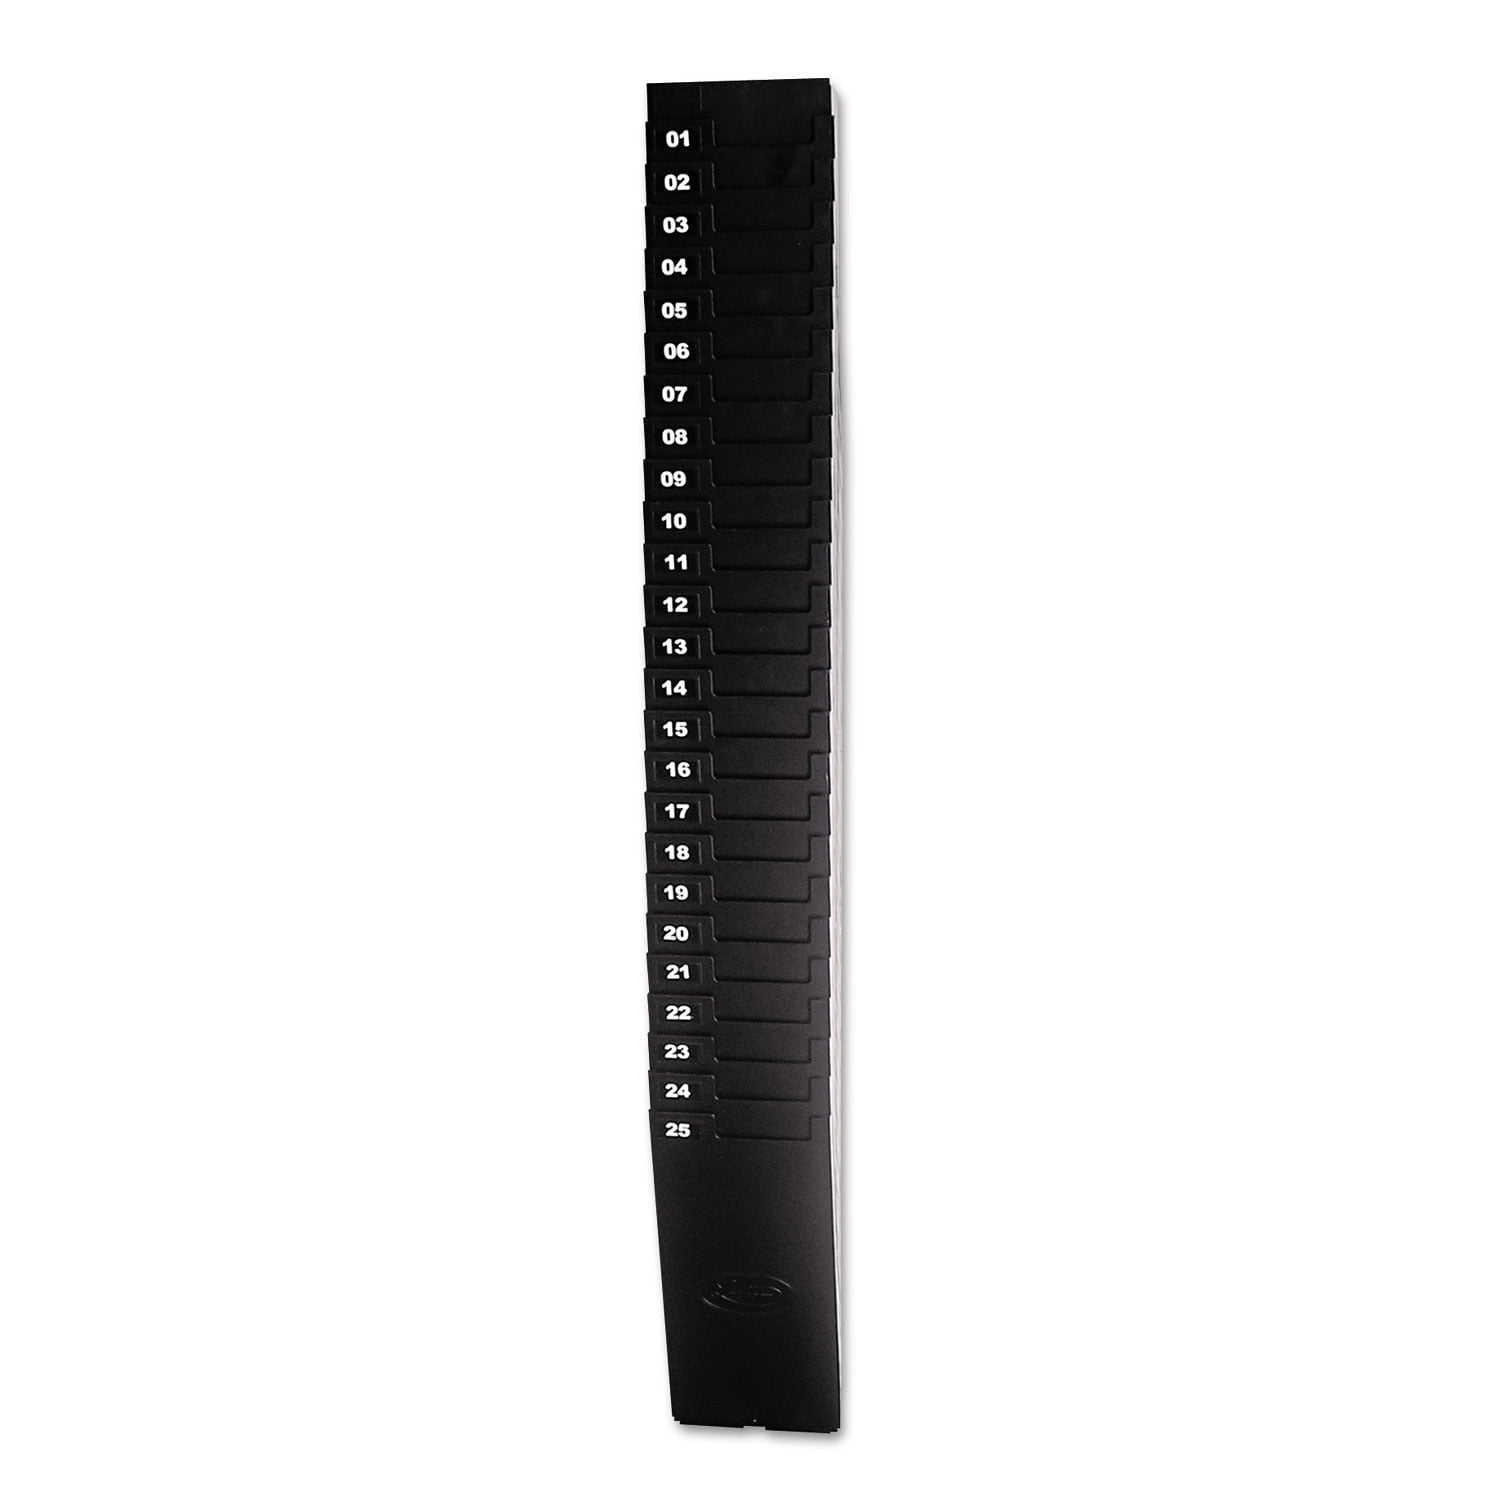 Sold as 1 Each Plastic Expandable Time Card Rack Black Holds 7 Cards 25-Pocket 